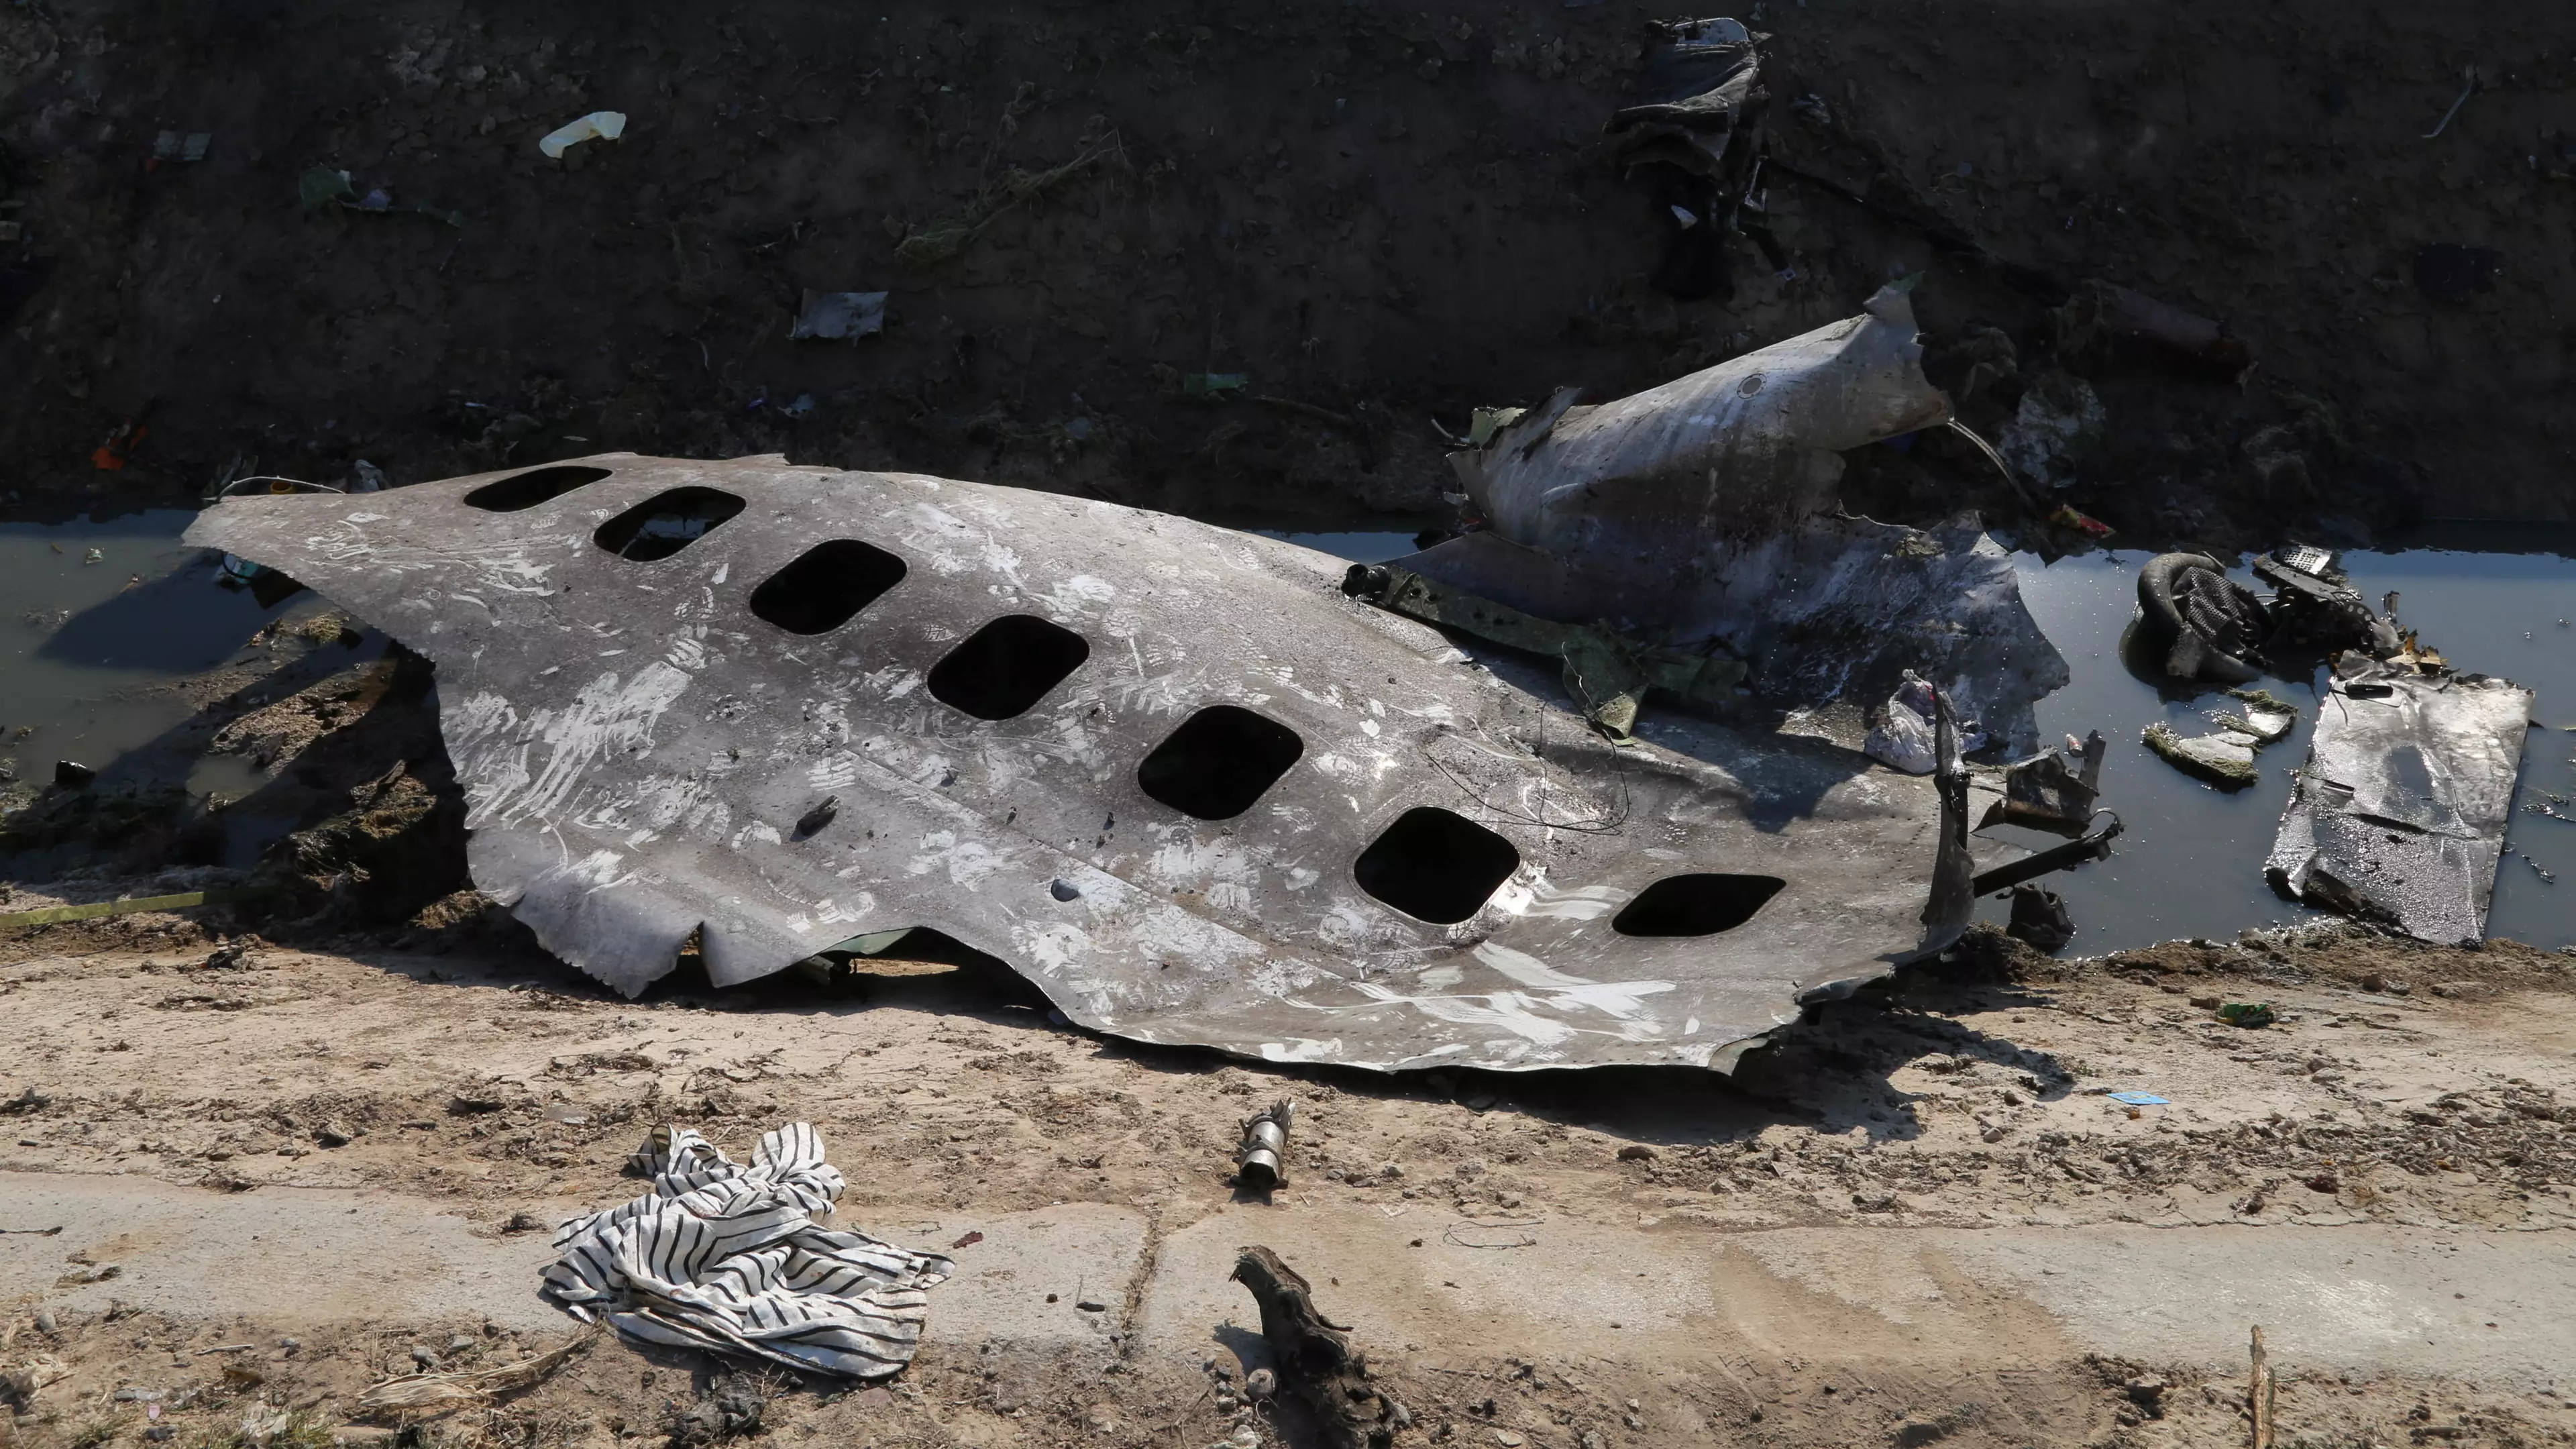 Iran Is Refusing To Hand Over The Black Box From The Ukraine Plane Crash